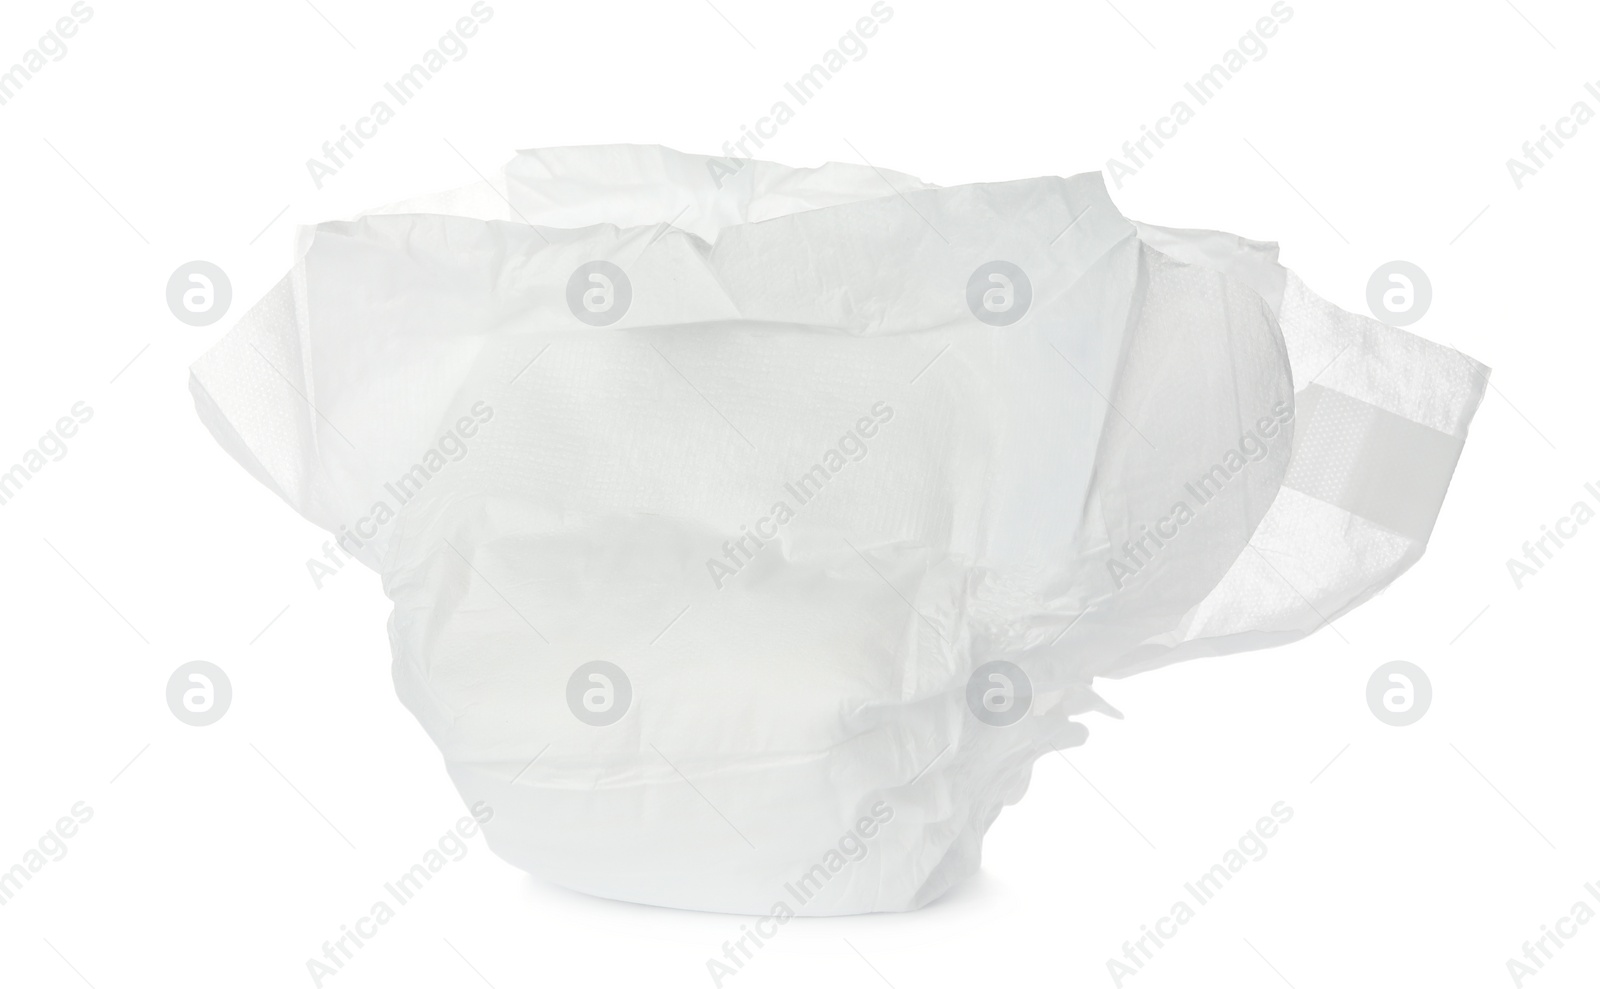 Photo of Baby diaper isolated on white. Child's garment